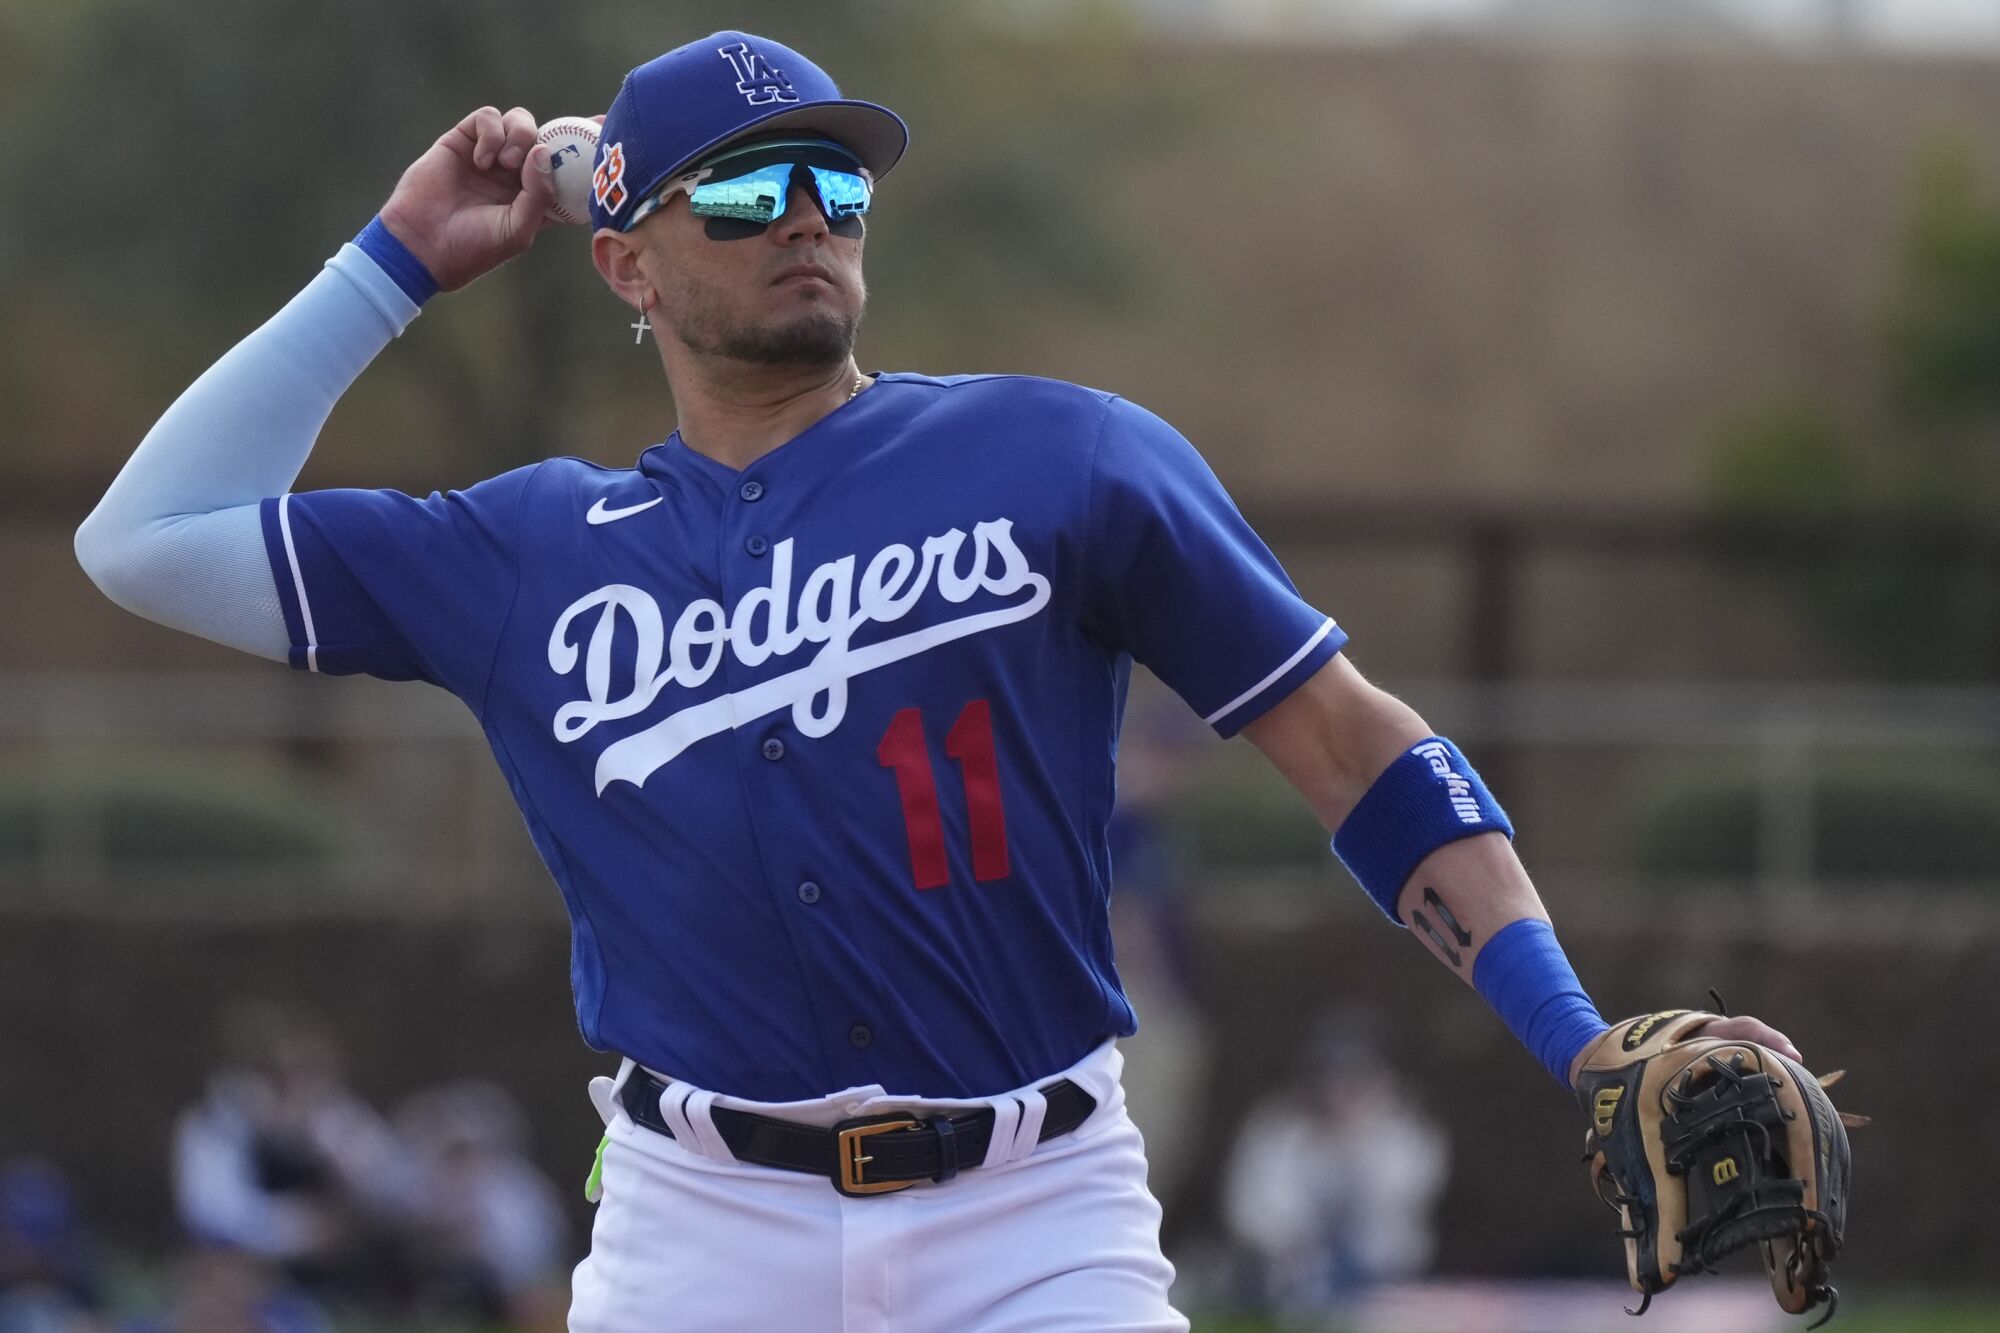 Dodgers shortstop Miguel Rojas warms up during the second inning of a spring training baseball game 